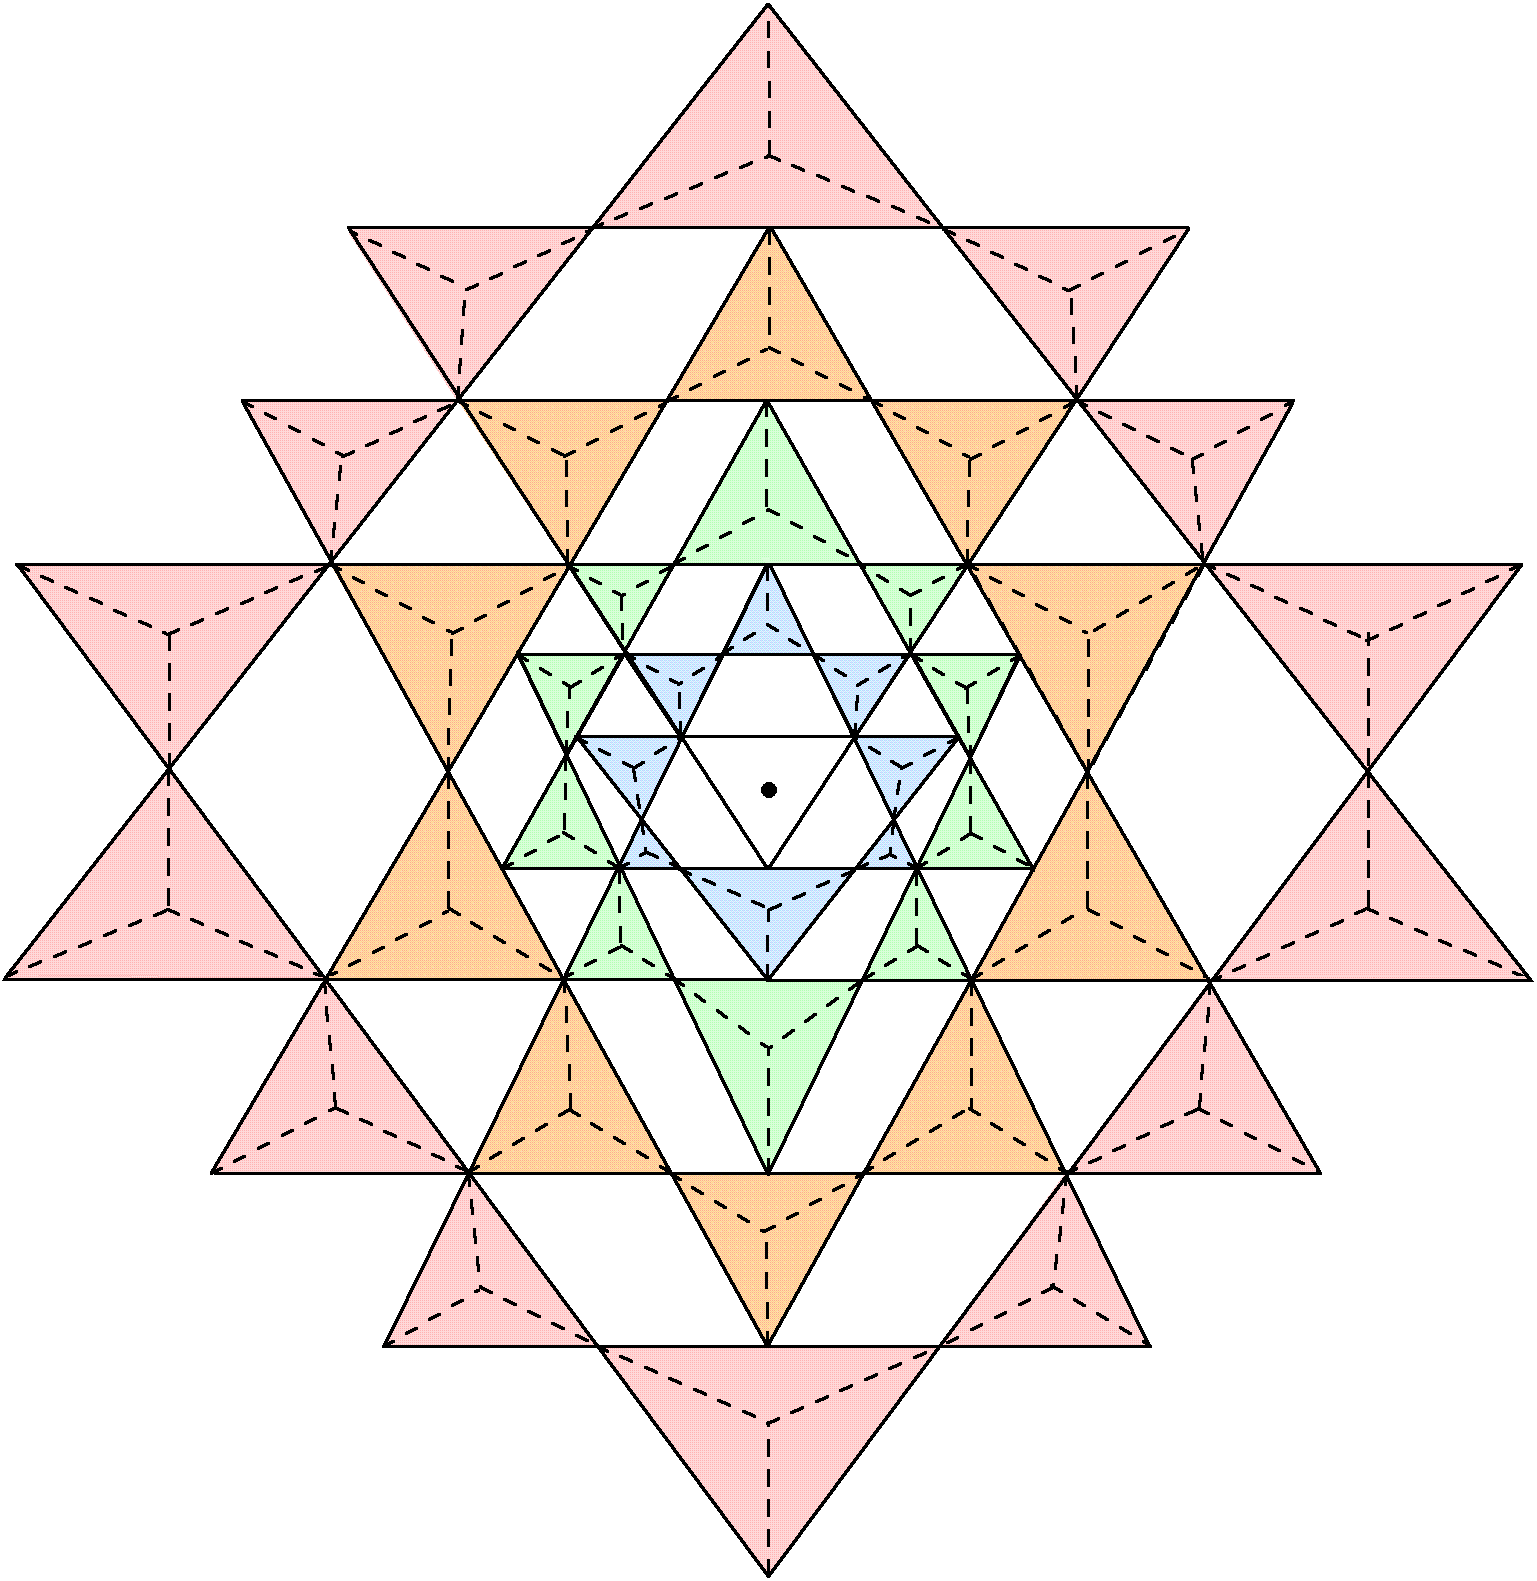 3-d Sri Yantra with Type A triangles